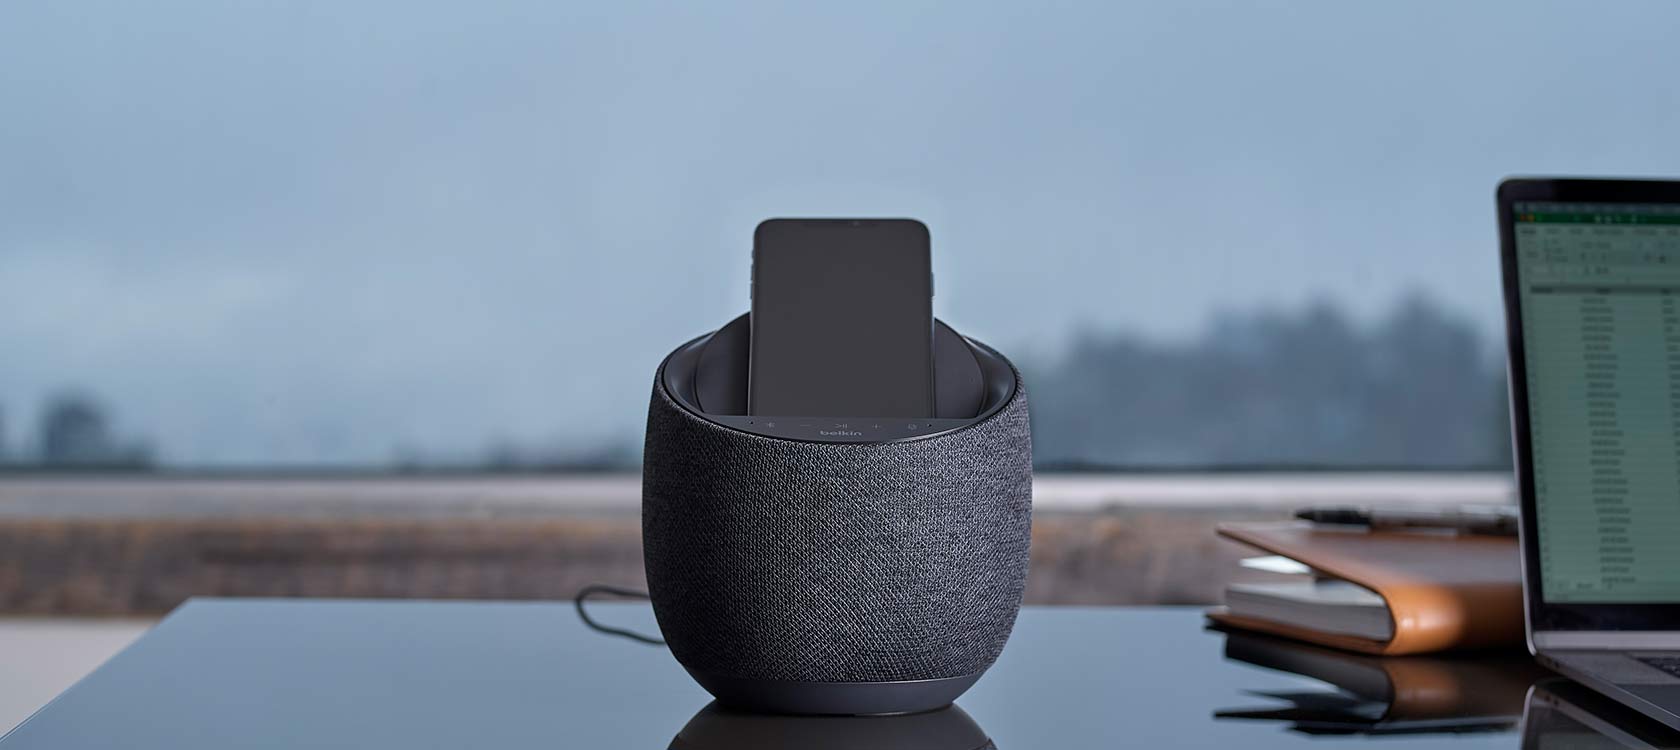 Belkin Soundform Elite offers premium sound quality, Google Assistant and wireless charging